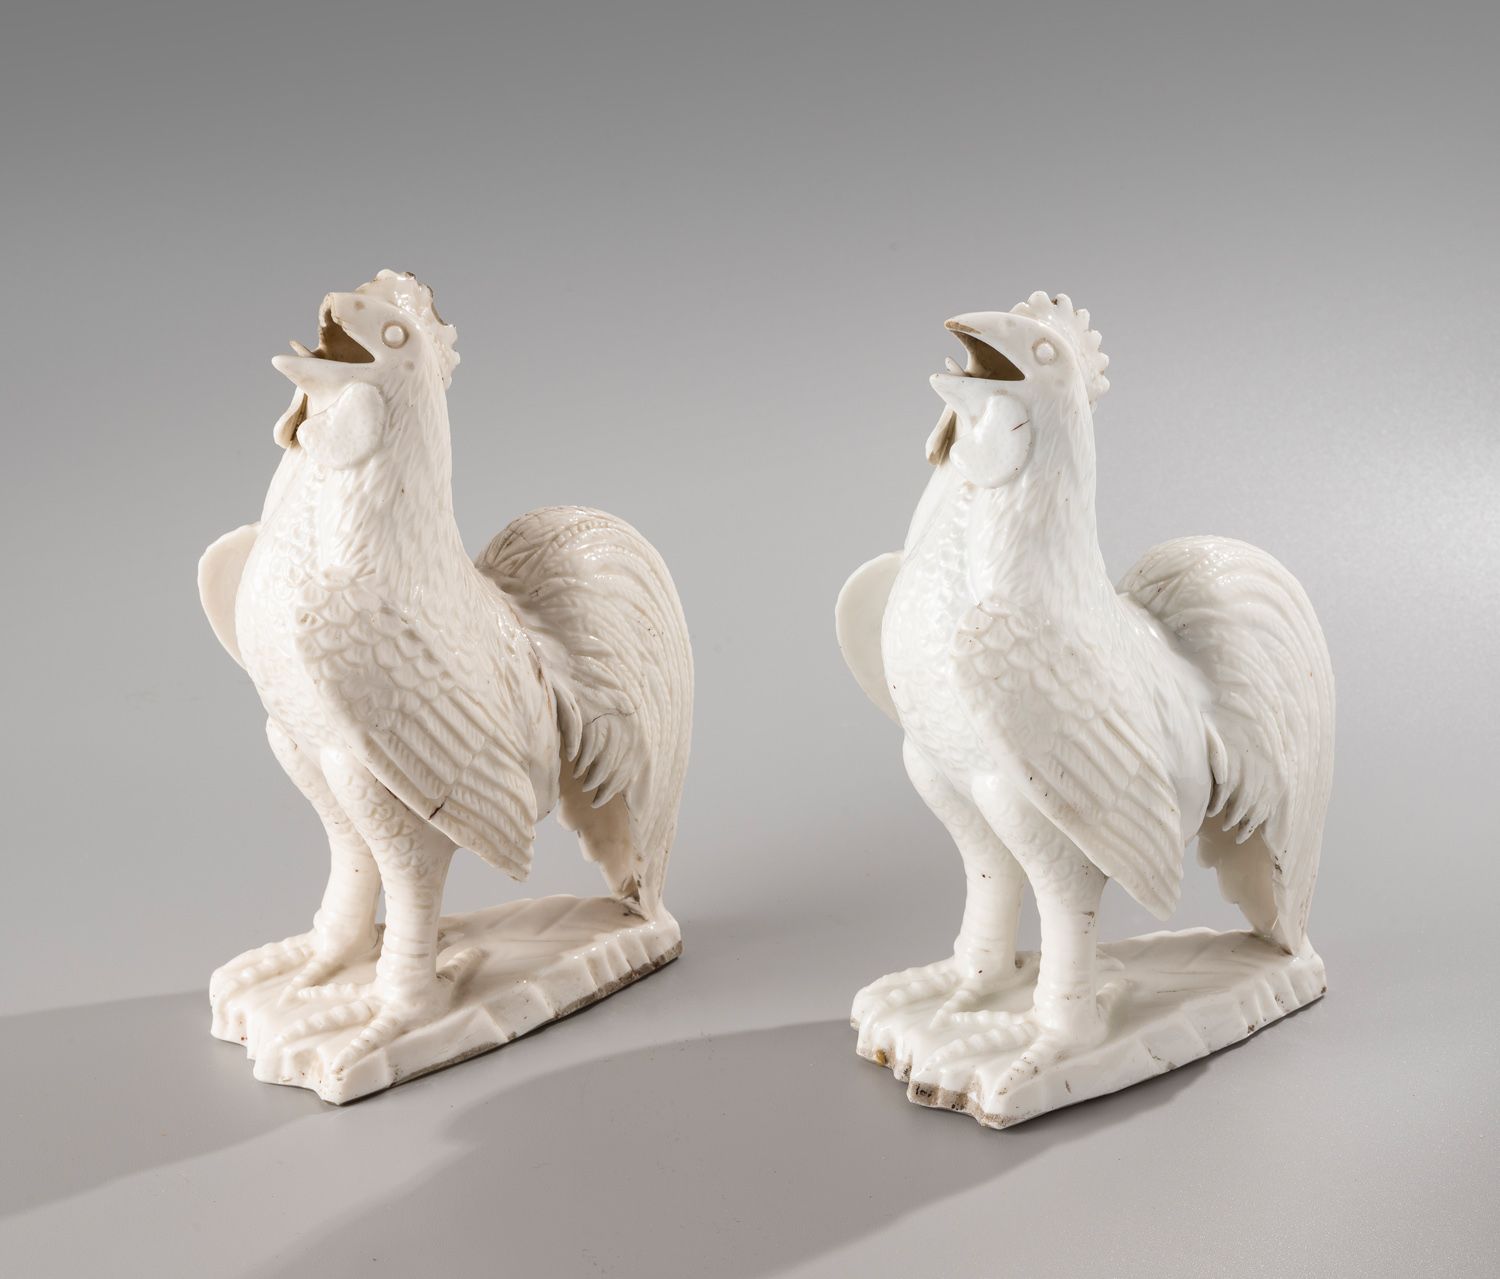 Null CHINA, 18th-19th century

Pair of white porcelain statuettes,

representing&hellip;